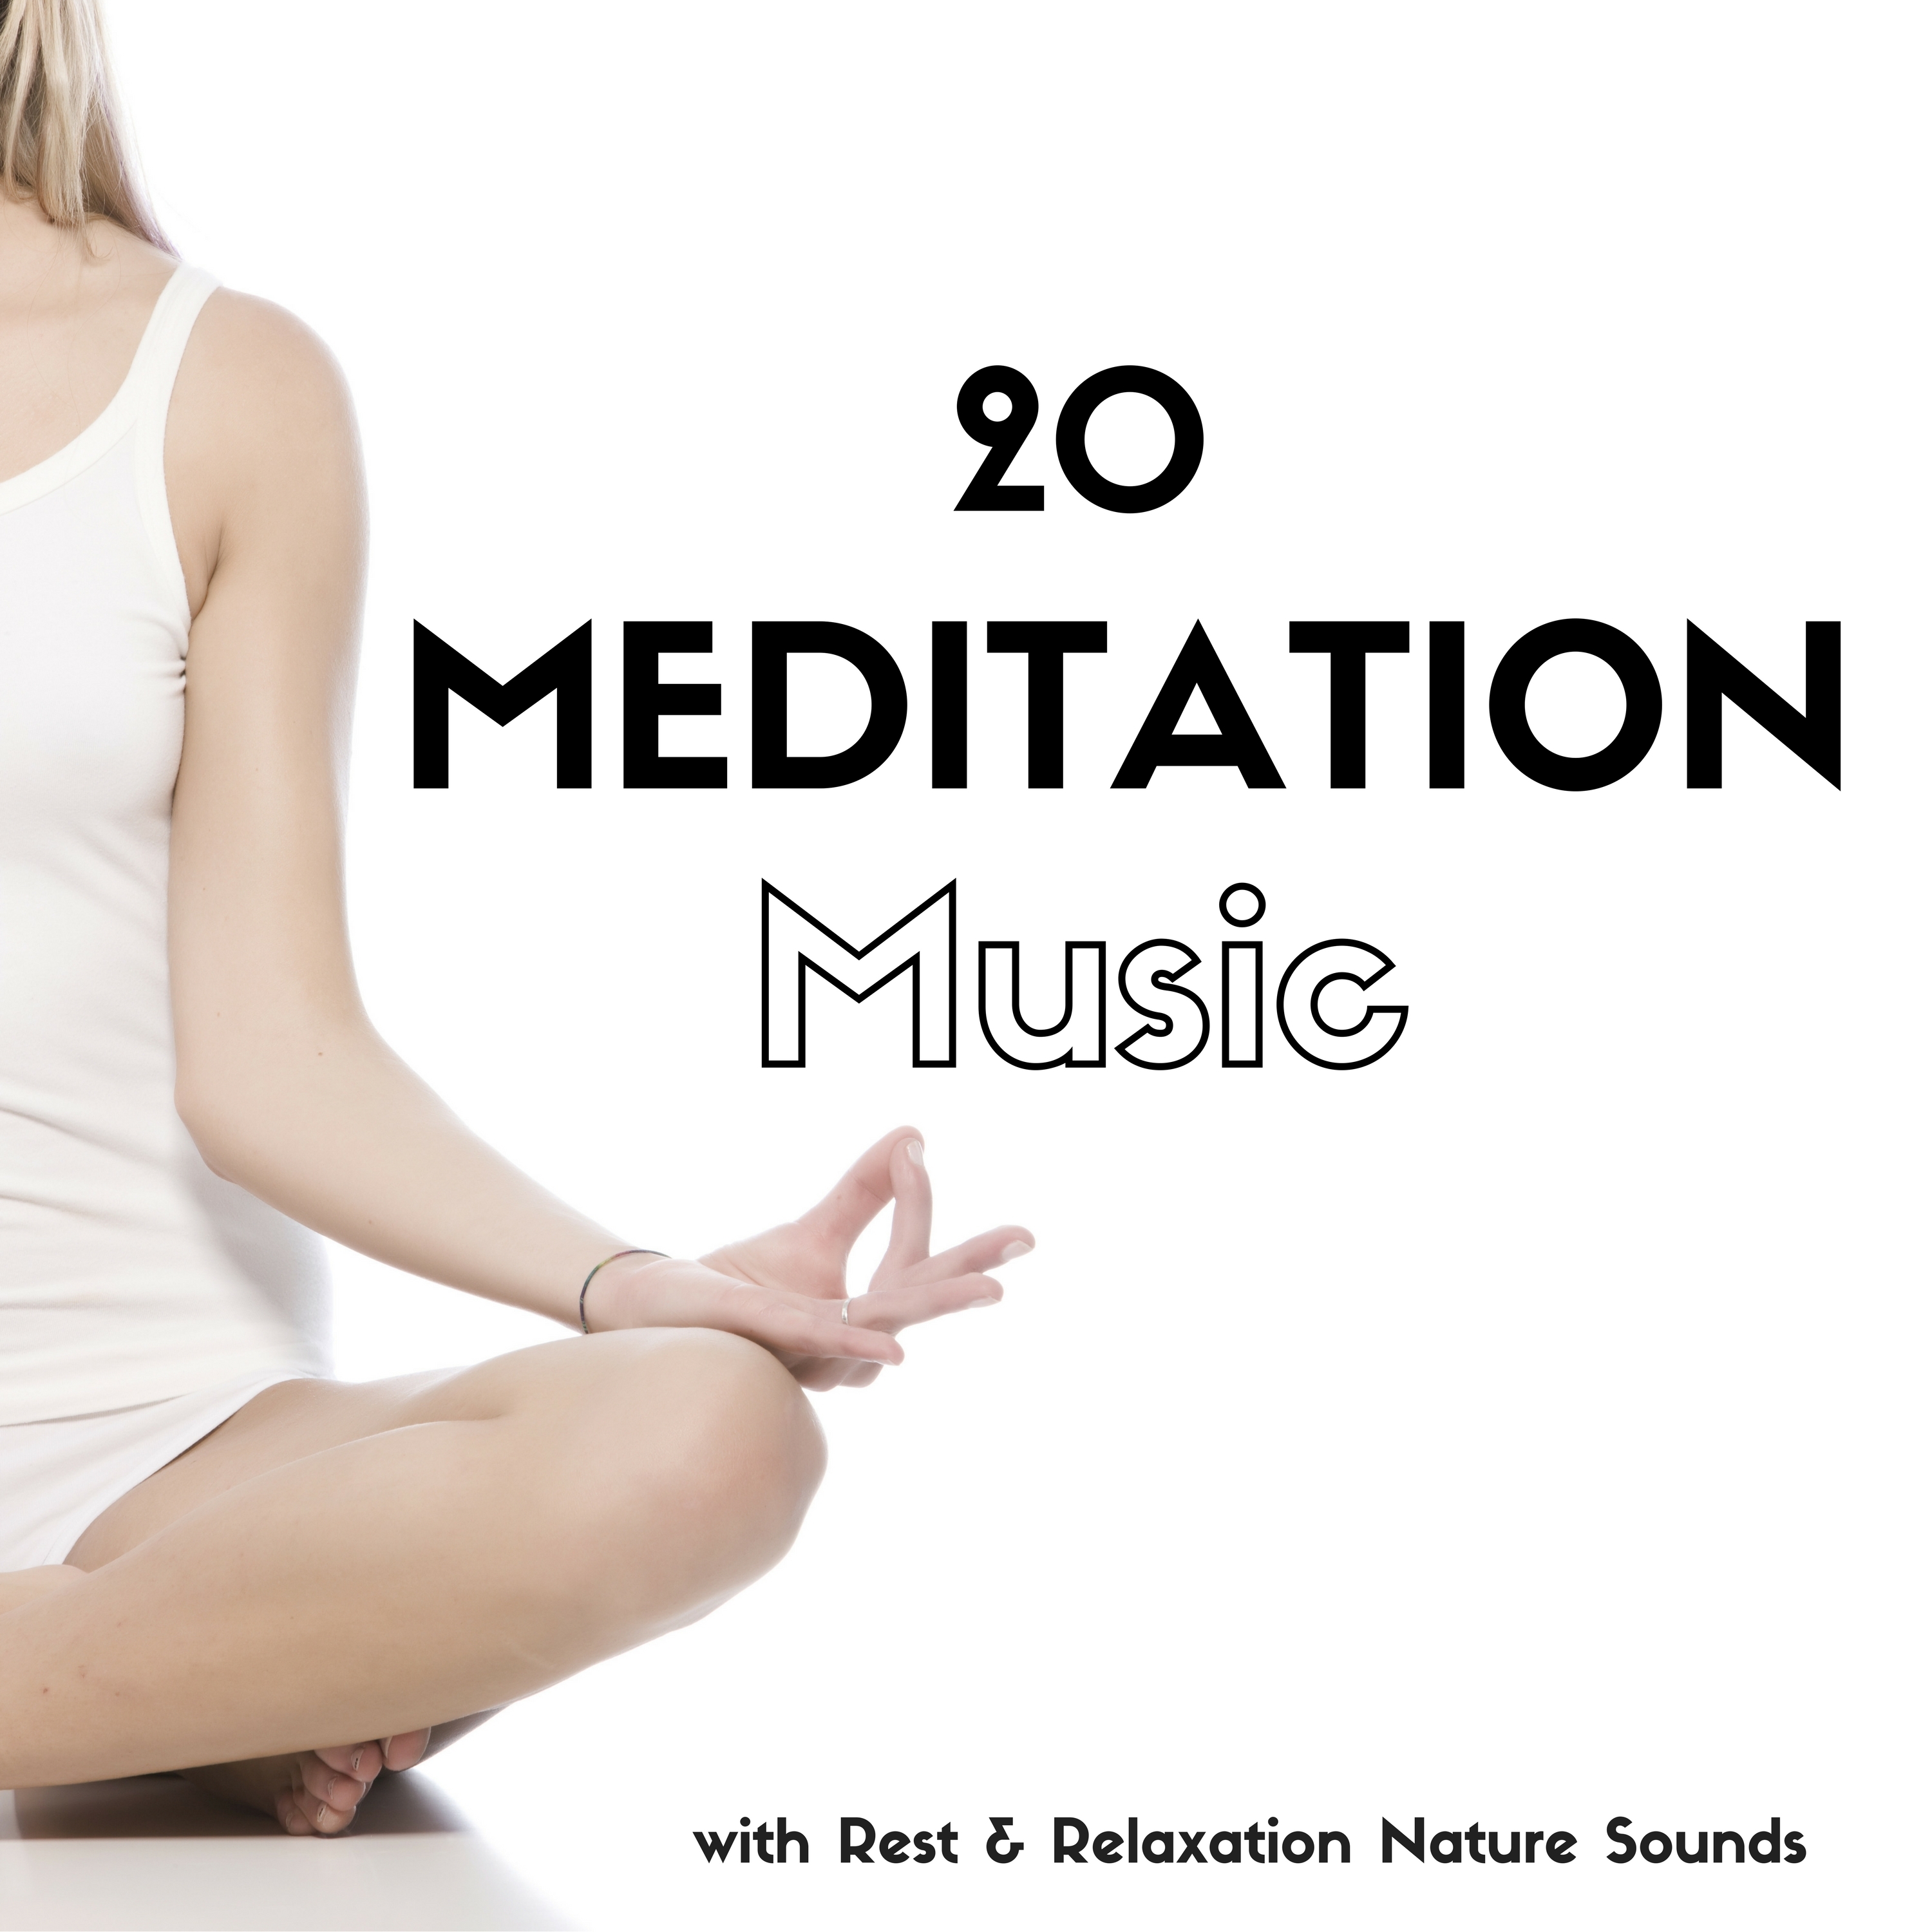 20 Meditation Music with Rest & Relaxation Nature Sounds